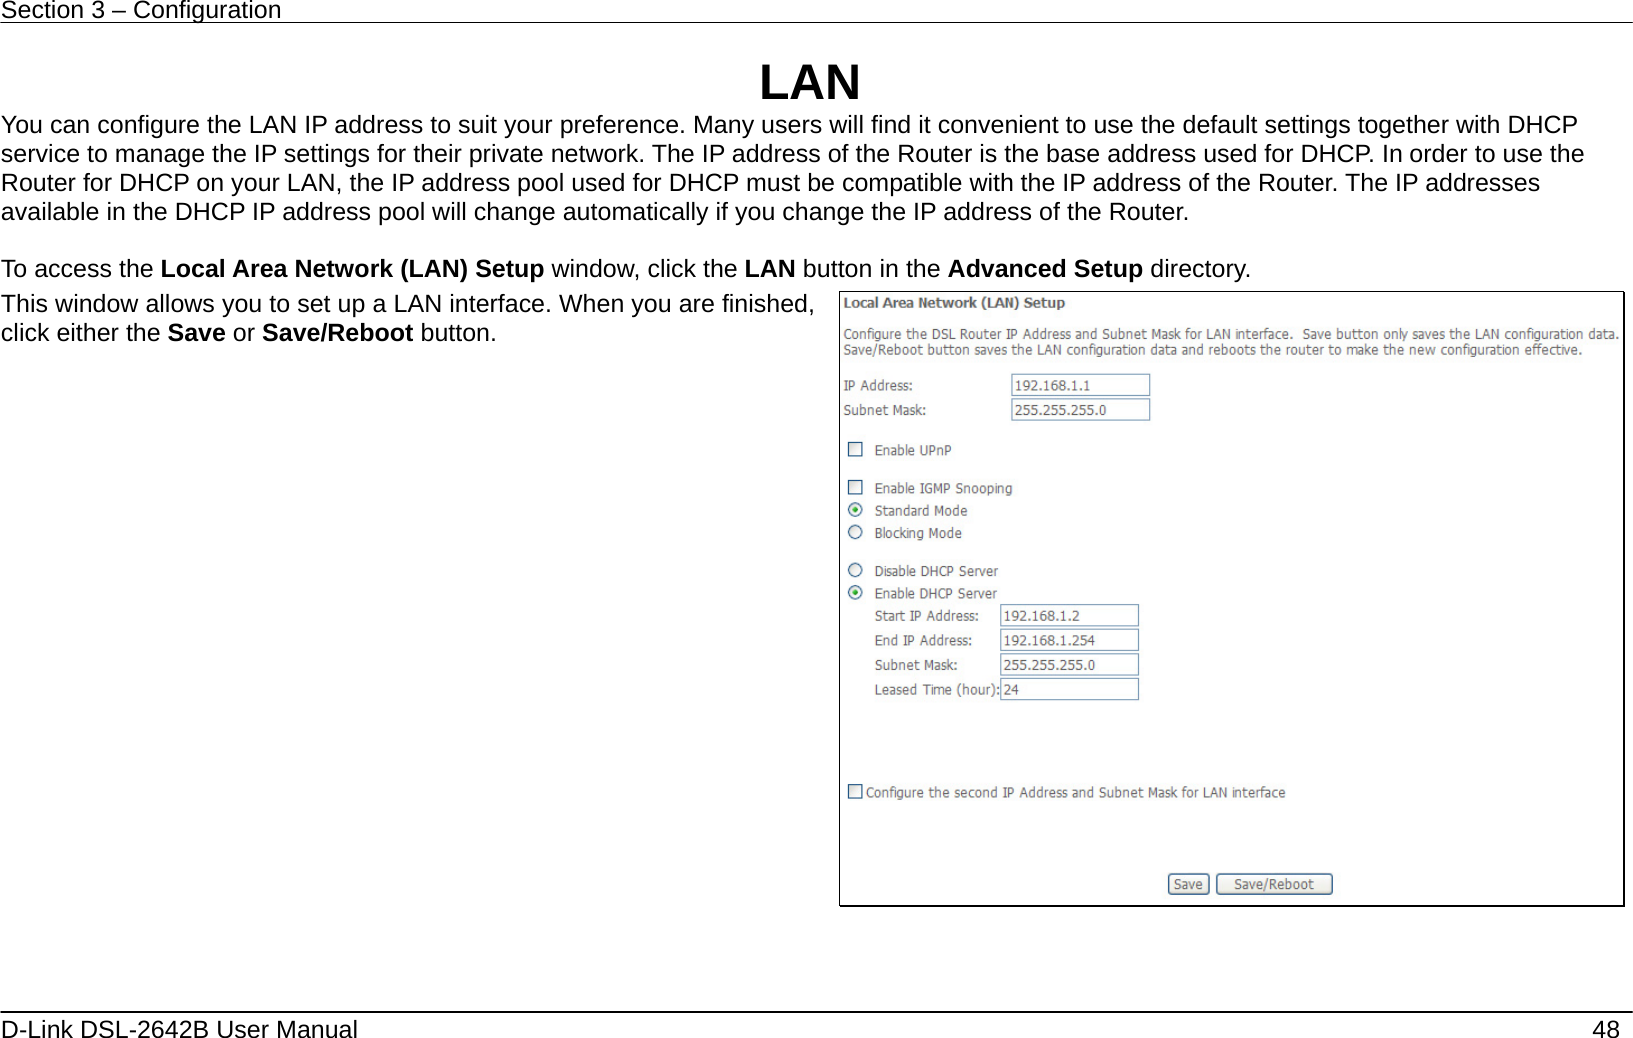 Section 3 – Configuration   D-Link DSL-2642B User Manual    48 LAN You can configure the LAN IP address to suit your preference. Many users will find it convenient to use the default settings together with DHCP service to manage the IP settings for their private network. The IP address of the Router is the base address used for DHCP. In order to use the Router for DHCP on your LAN, the IP address pool used for DHCP must be compatible with the IP address of the Router. The IP addresses available in the DHCP IP address pool will change automatically if you change the IP address of the Router.      To access the Local Area Network (LAN) Setup window, click the LAN button in the Advanced Setup directory. This window allows you to set up a LAN interface. When you are finished, click either the Save or Save/Reboot button.       